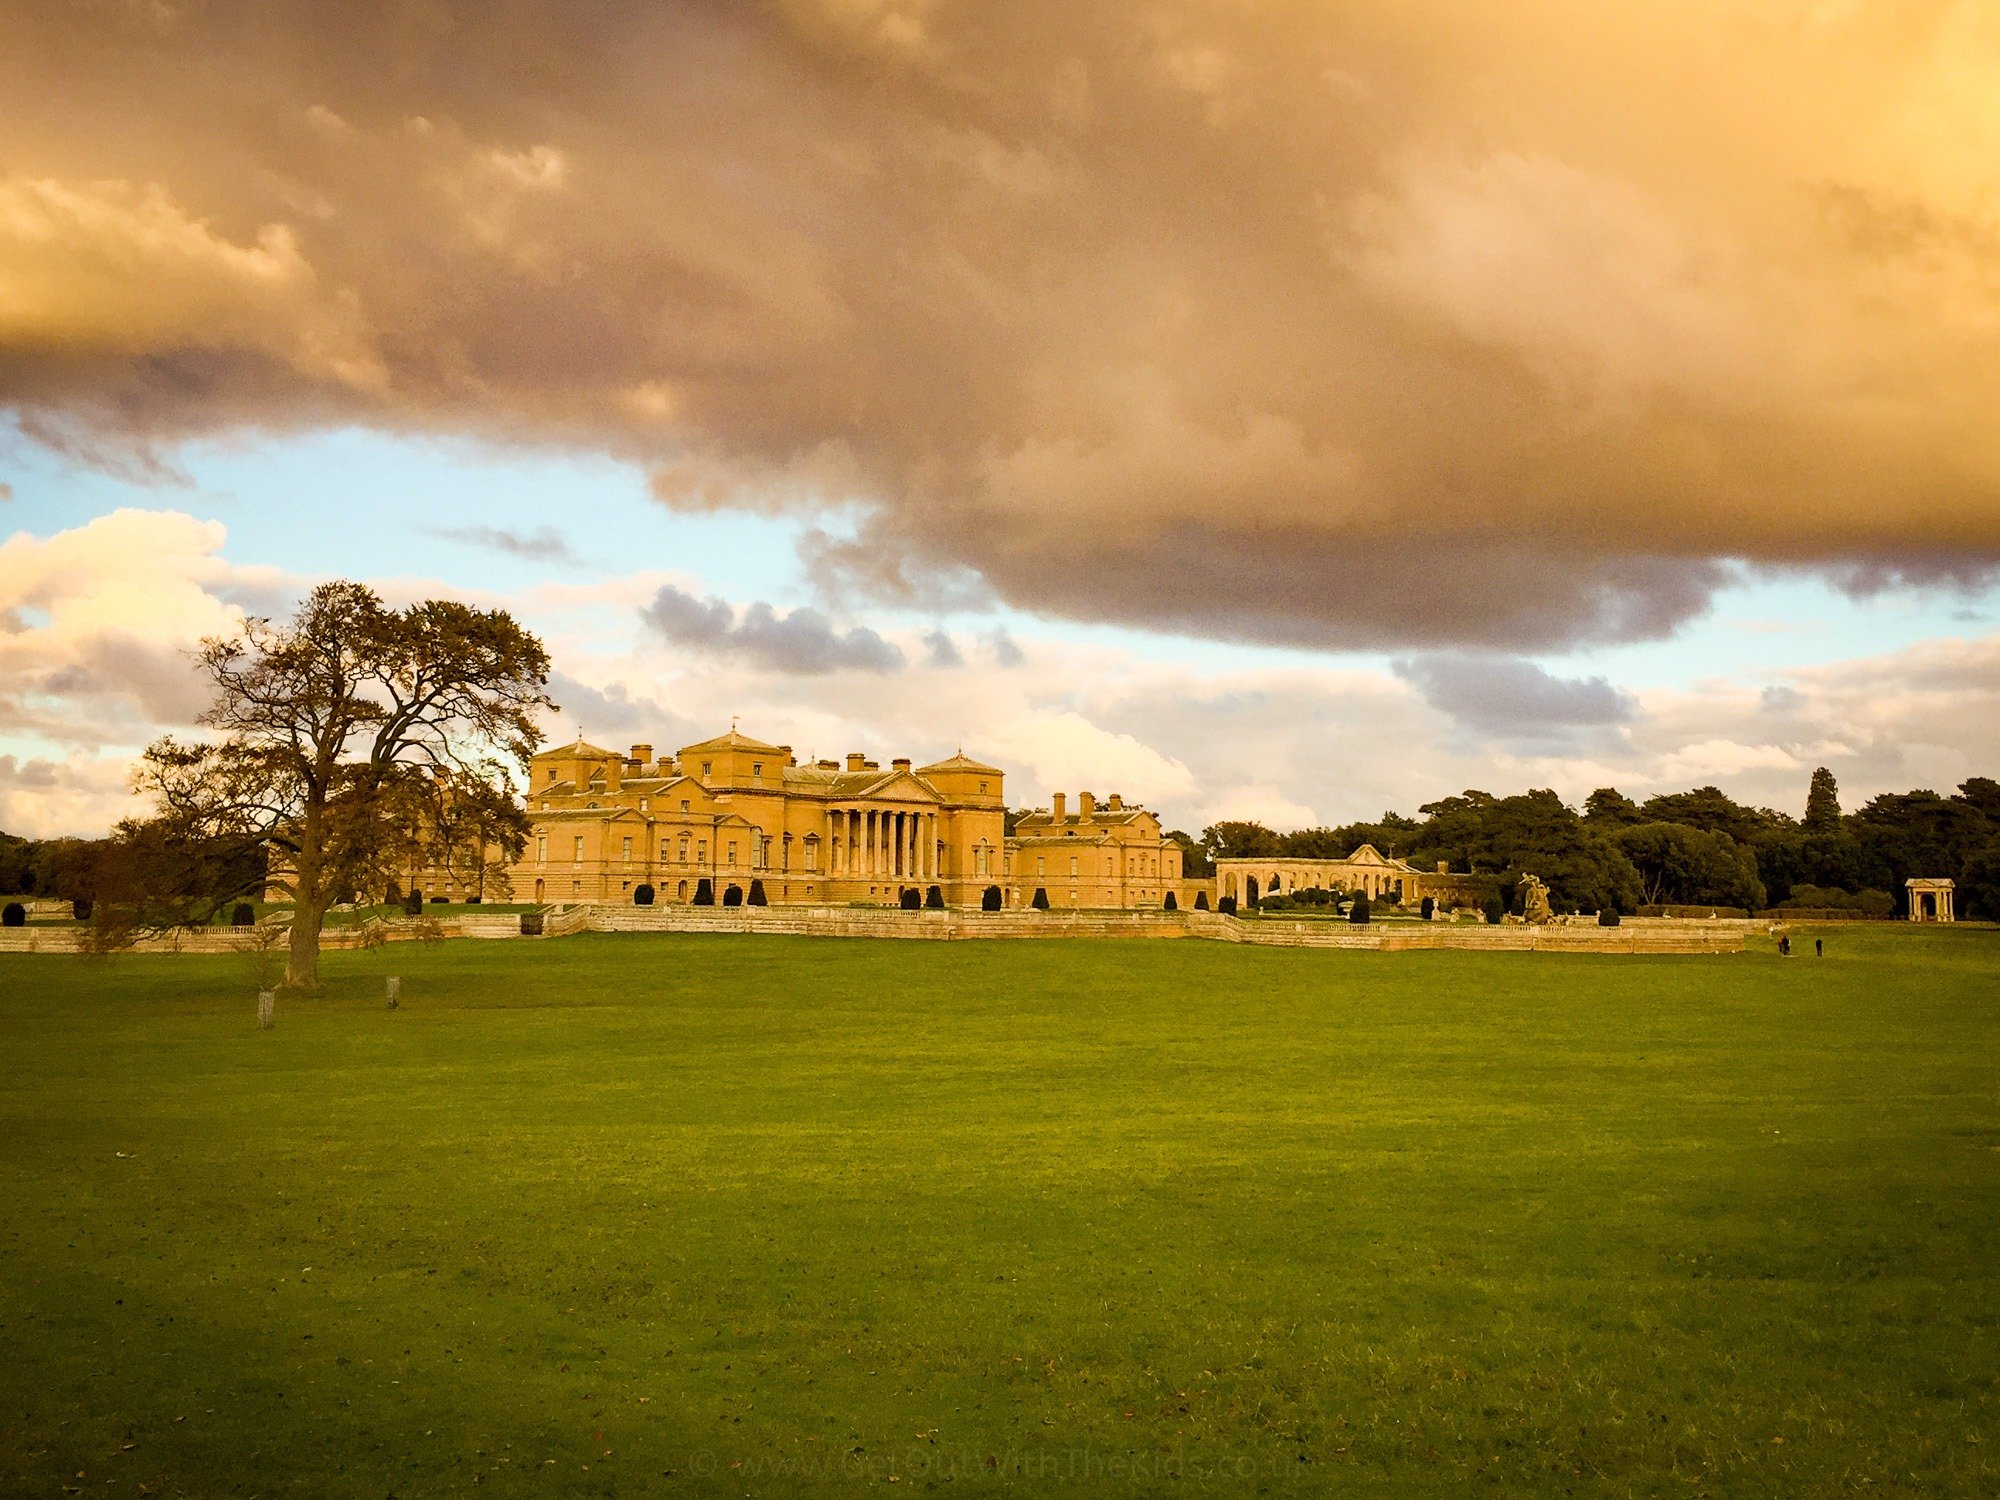 A view back at Holkham Hall